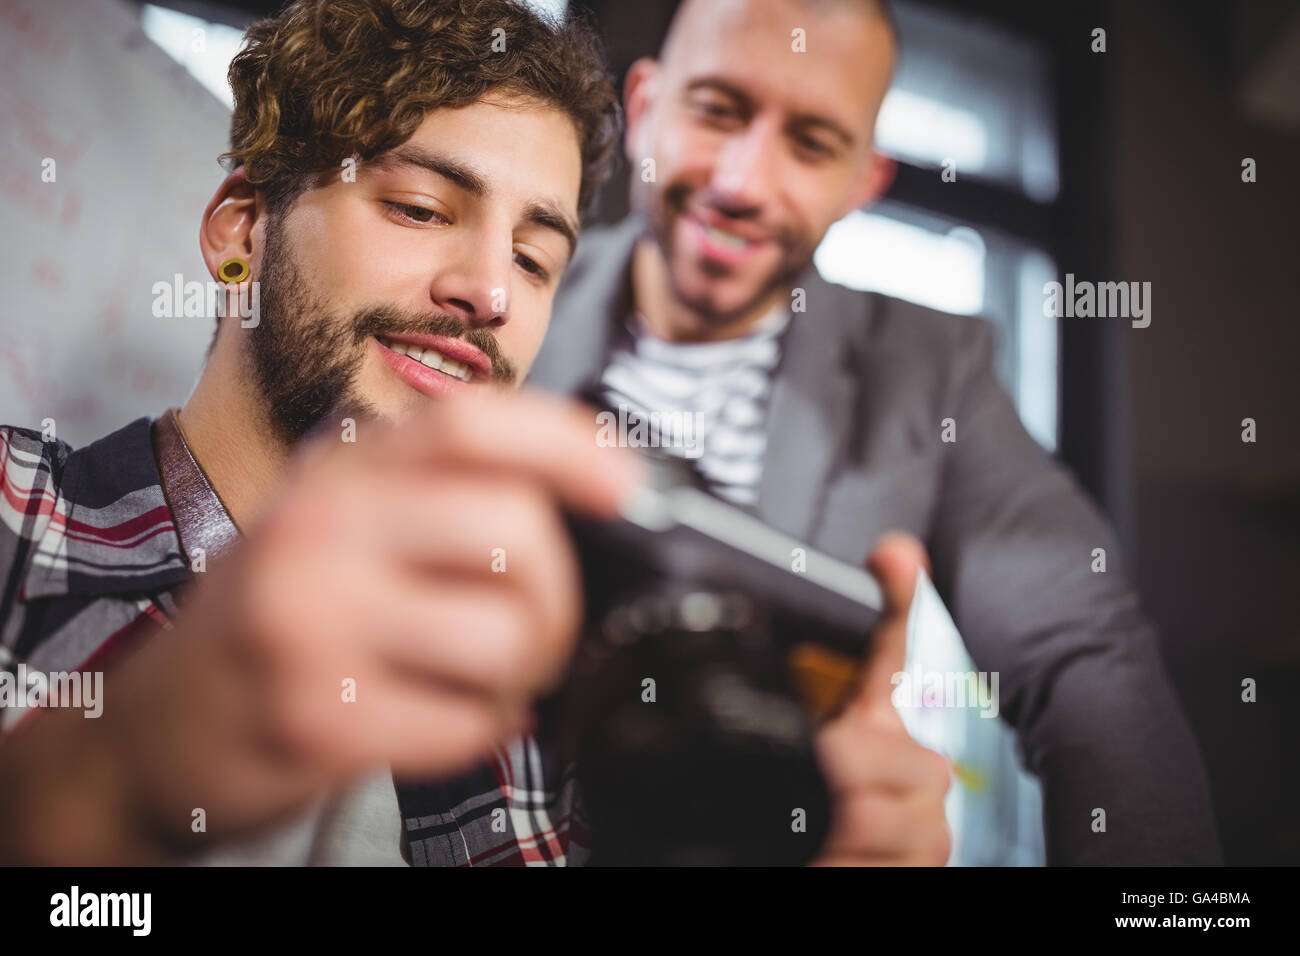 Male colleagues smiling while looking in camera Stock Photo